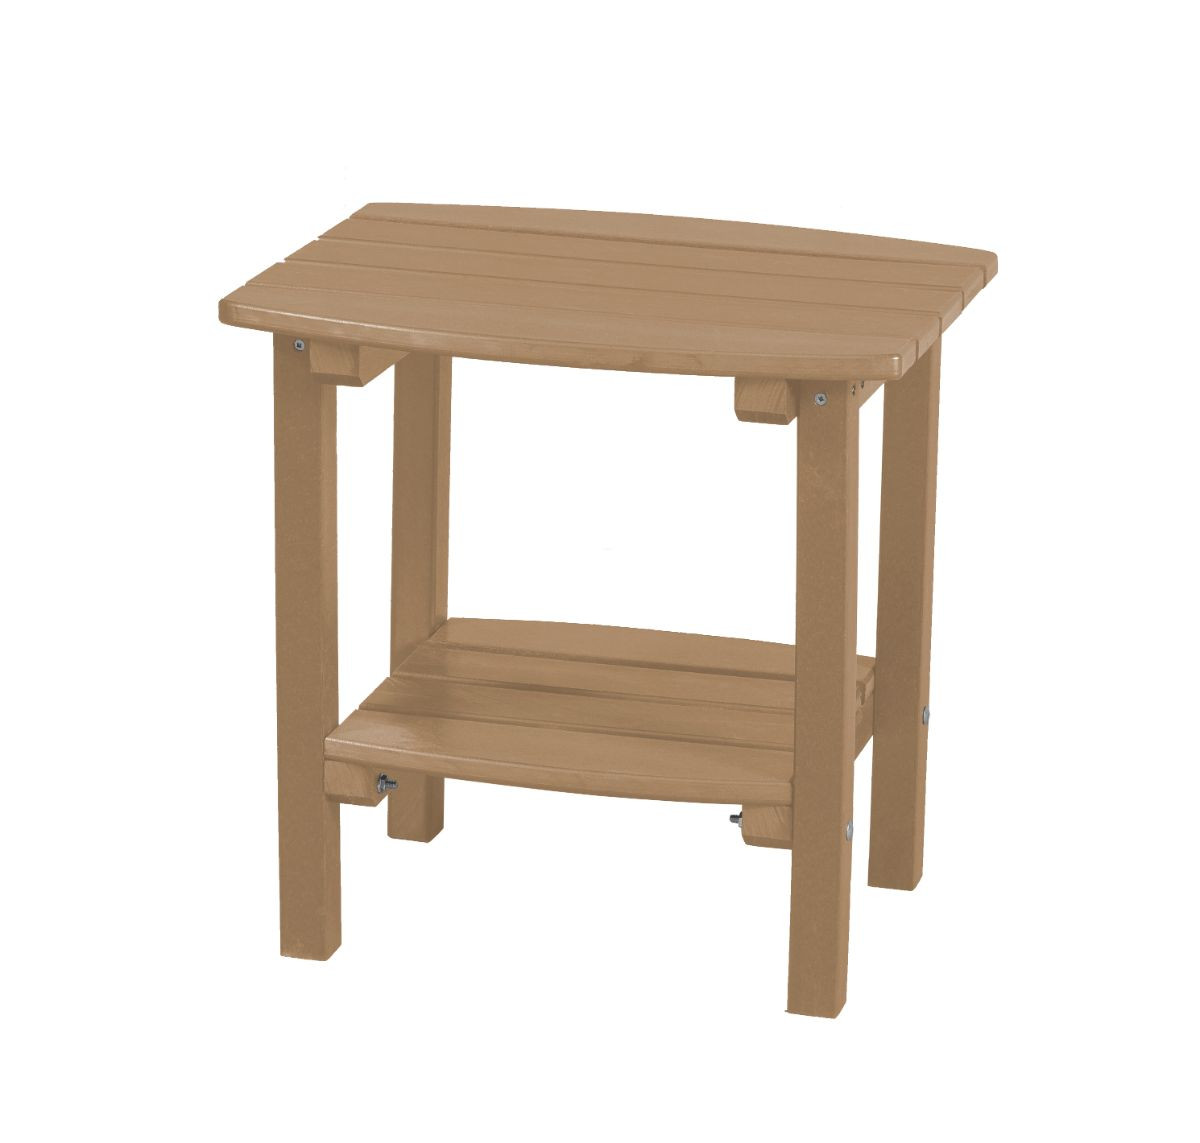 Weathered Wood Odessa Small Outdoor Side Table